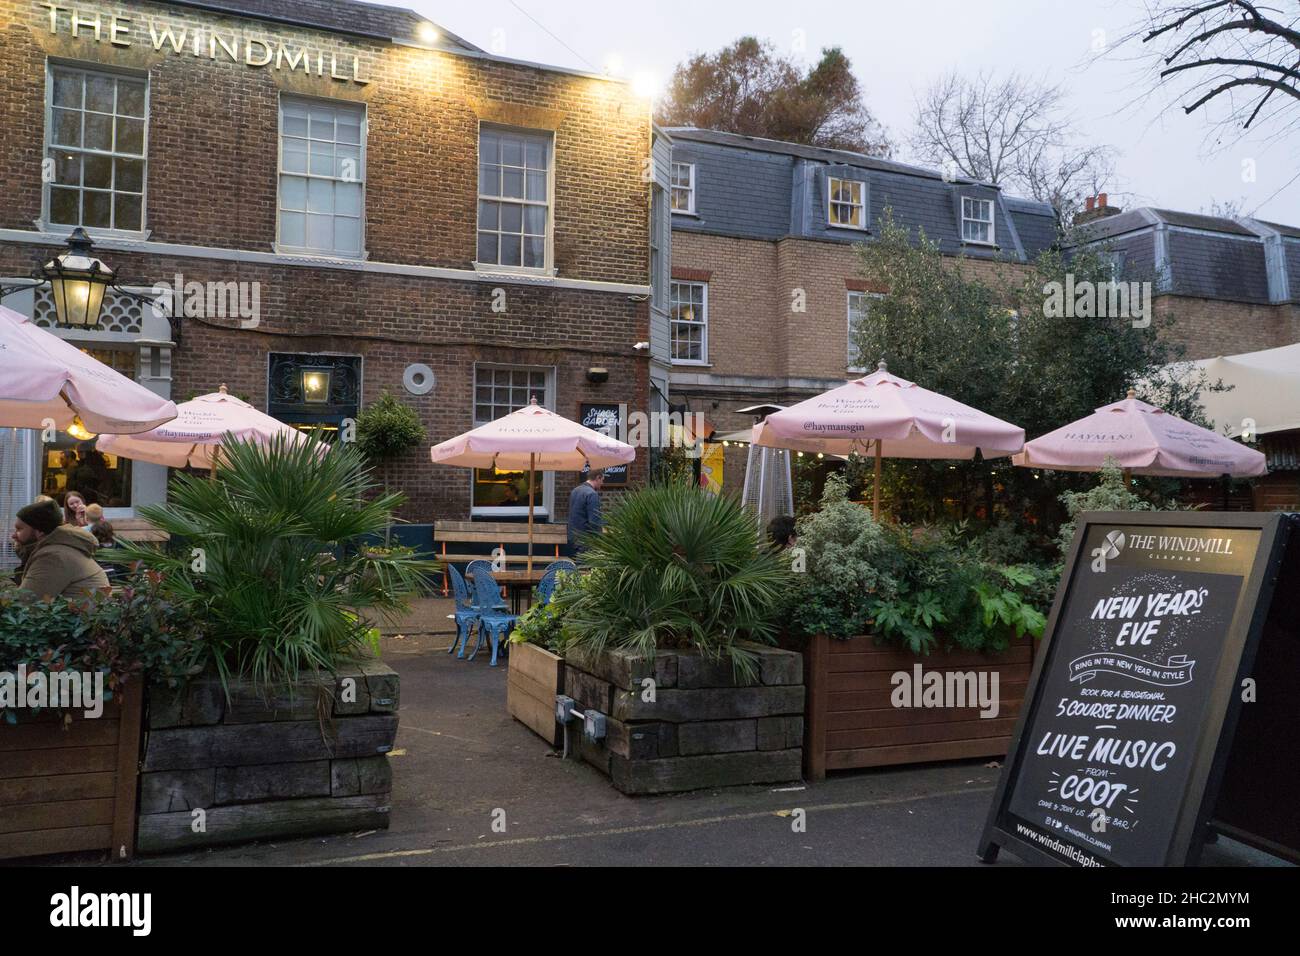 London, UK, 23 December 2021: The Windmill pub on Clapham Common has a blackboard with one side advertising Christmas specials and the other side their New Year's Eve party. The hospitality sector has been hit by a wave of cancellations since the spread of the omicron variant began and there are fears for pub landlords, nighclubs and restaurant owners that a new lockdown may be brought in after Christmas. Anna Watson/Alamy Live News Stock Photo